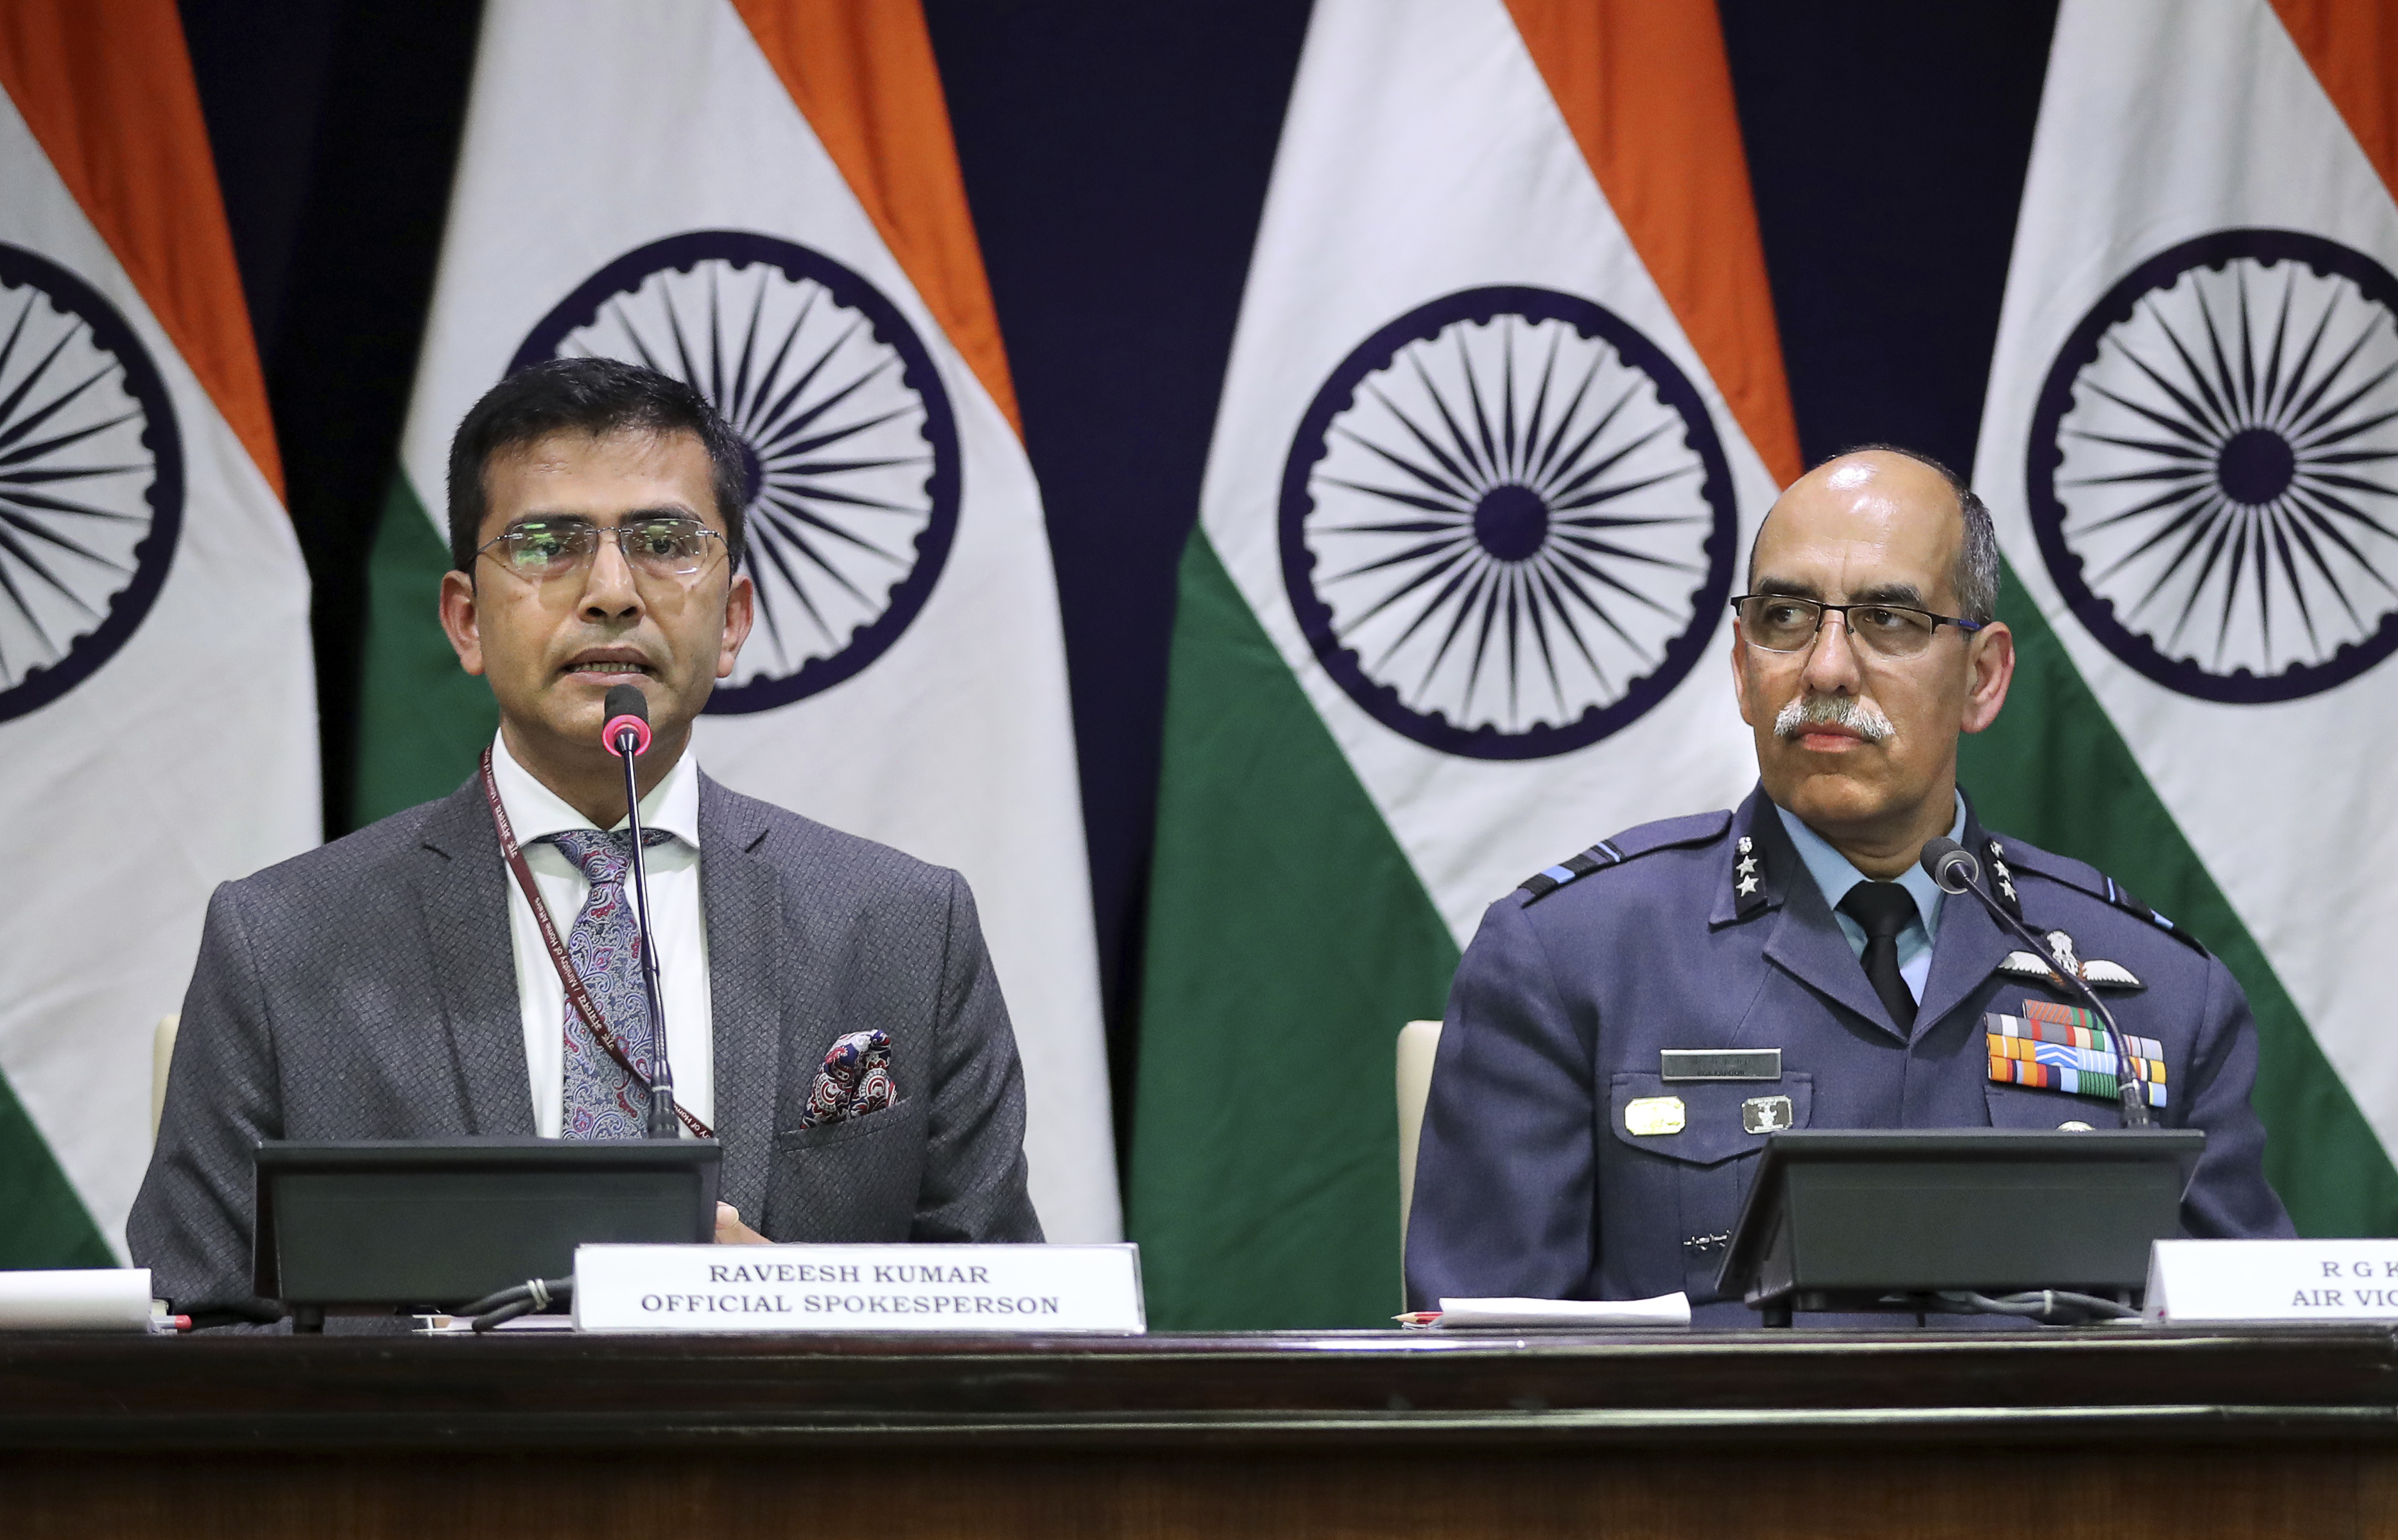 Indian Foreign Ministry spokesperson Raveesh Kumar, left, with Indian Air Force Air Vice Marshal R.G.K. Kapoor gives a statement in New Delhi - AP